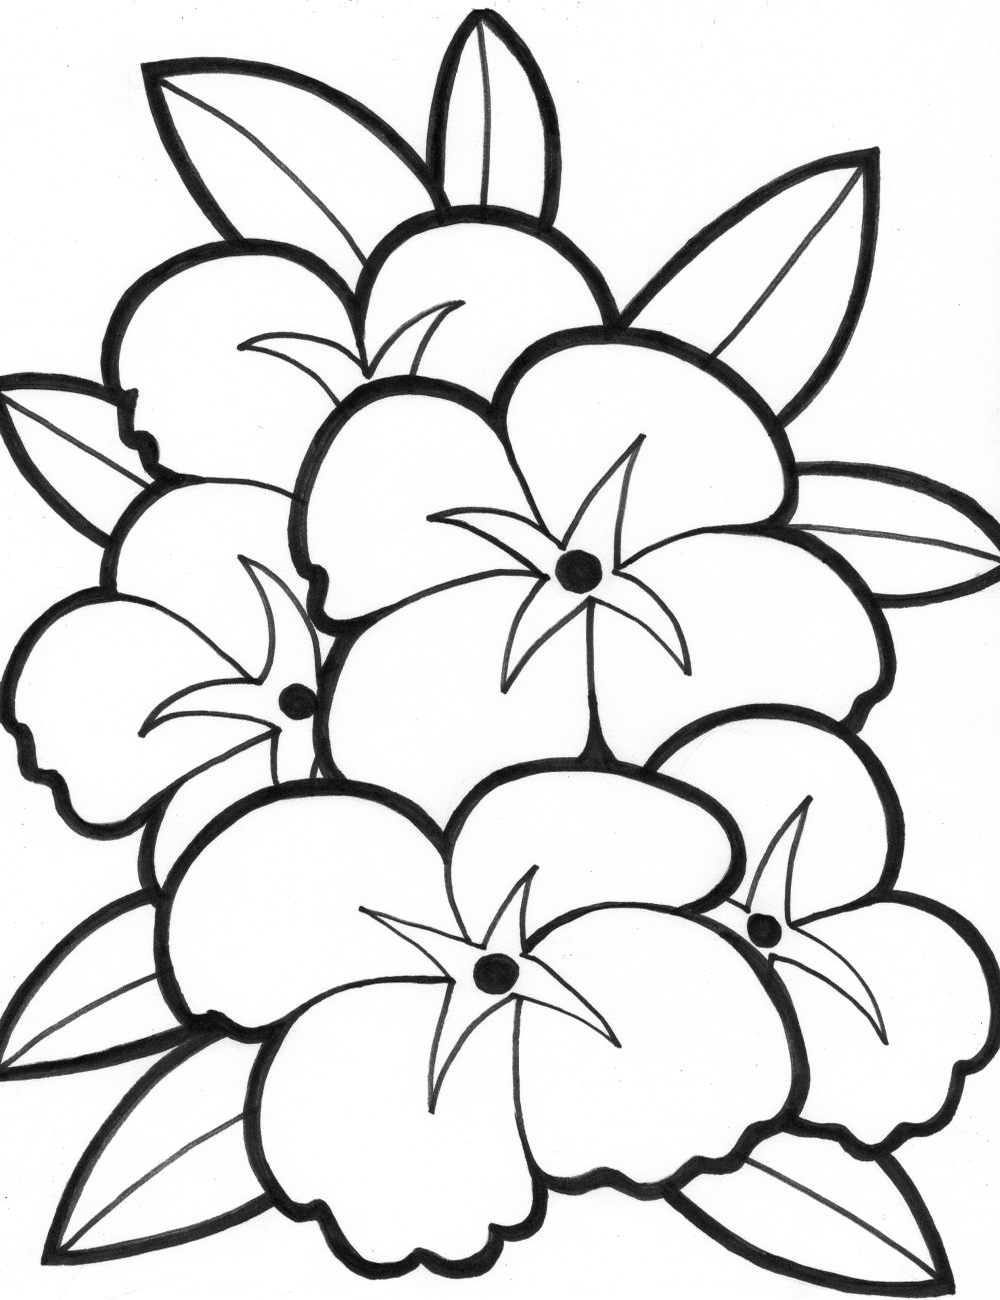 Unique Simple Flower Coloring Pages For Kids Design Kids Children And Adult Coloring Pages